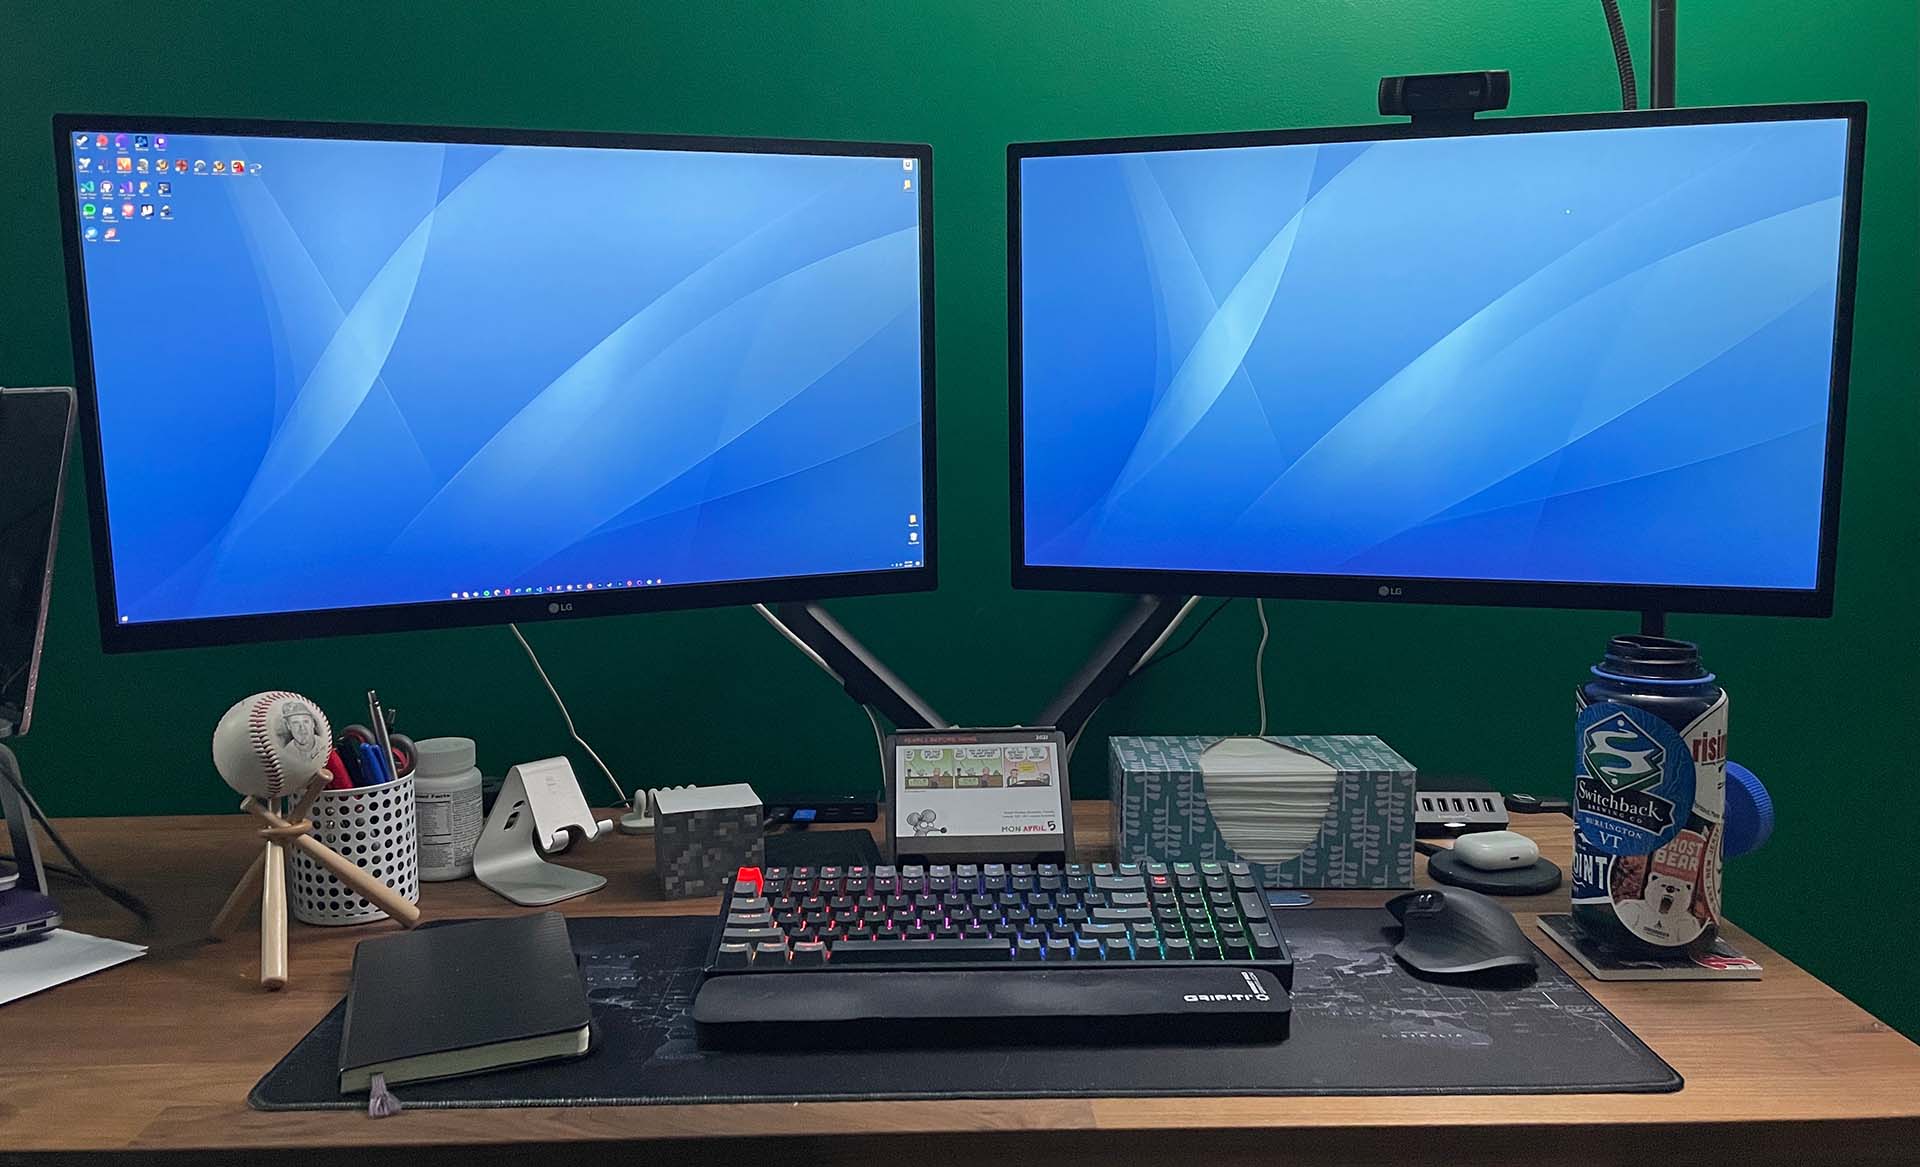 My personal desk setup with dual 27'' 4k monitors